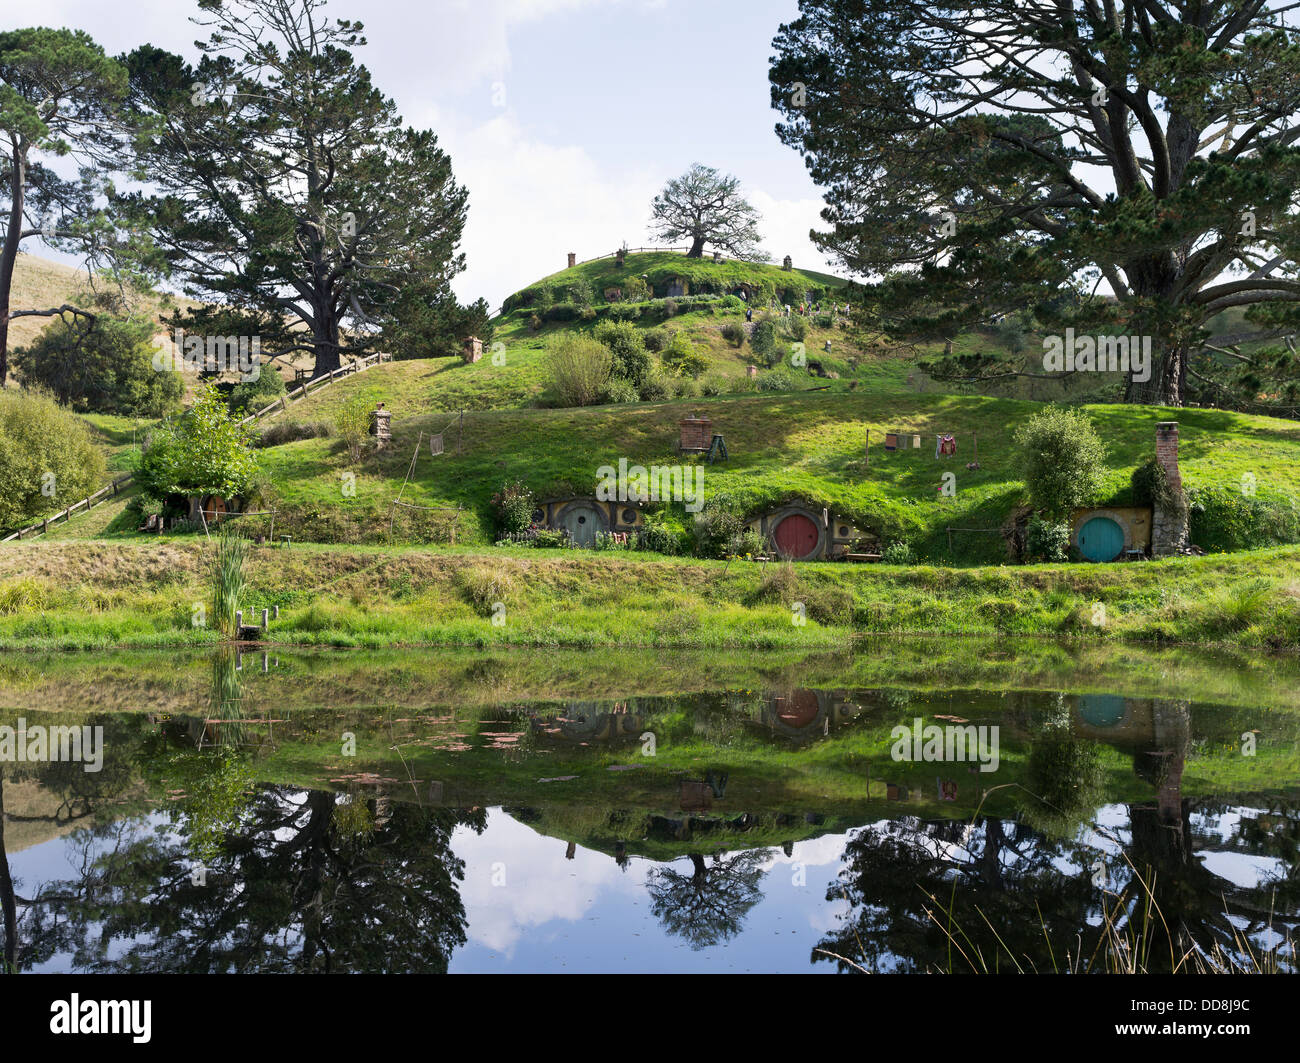 dh Lord of the Rings HOBBITON NEW ZEALAND Hobbits cottage set movie site films house hobbit houses homes Stock Photo